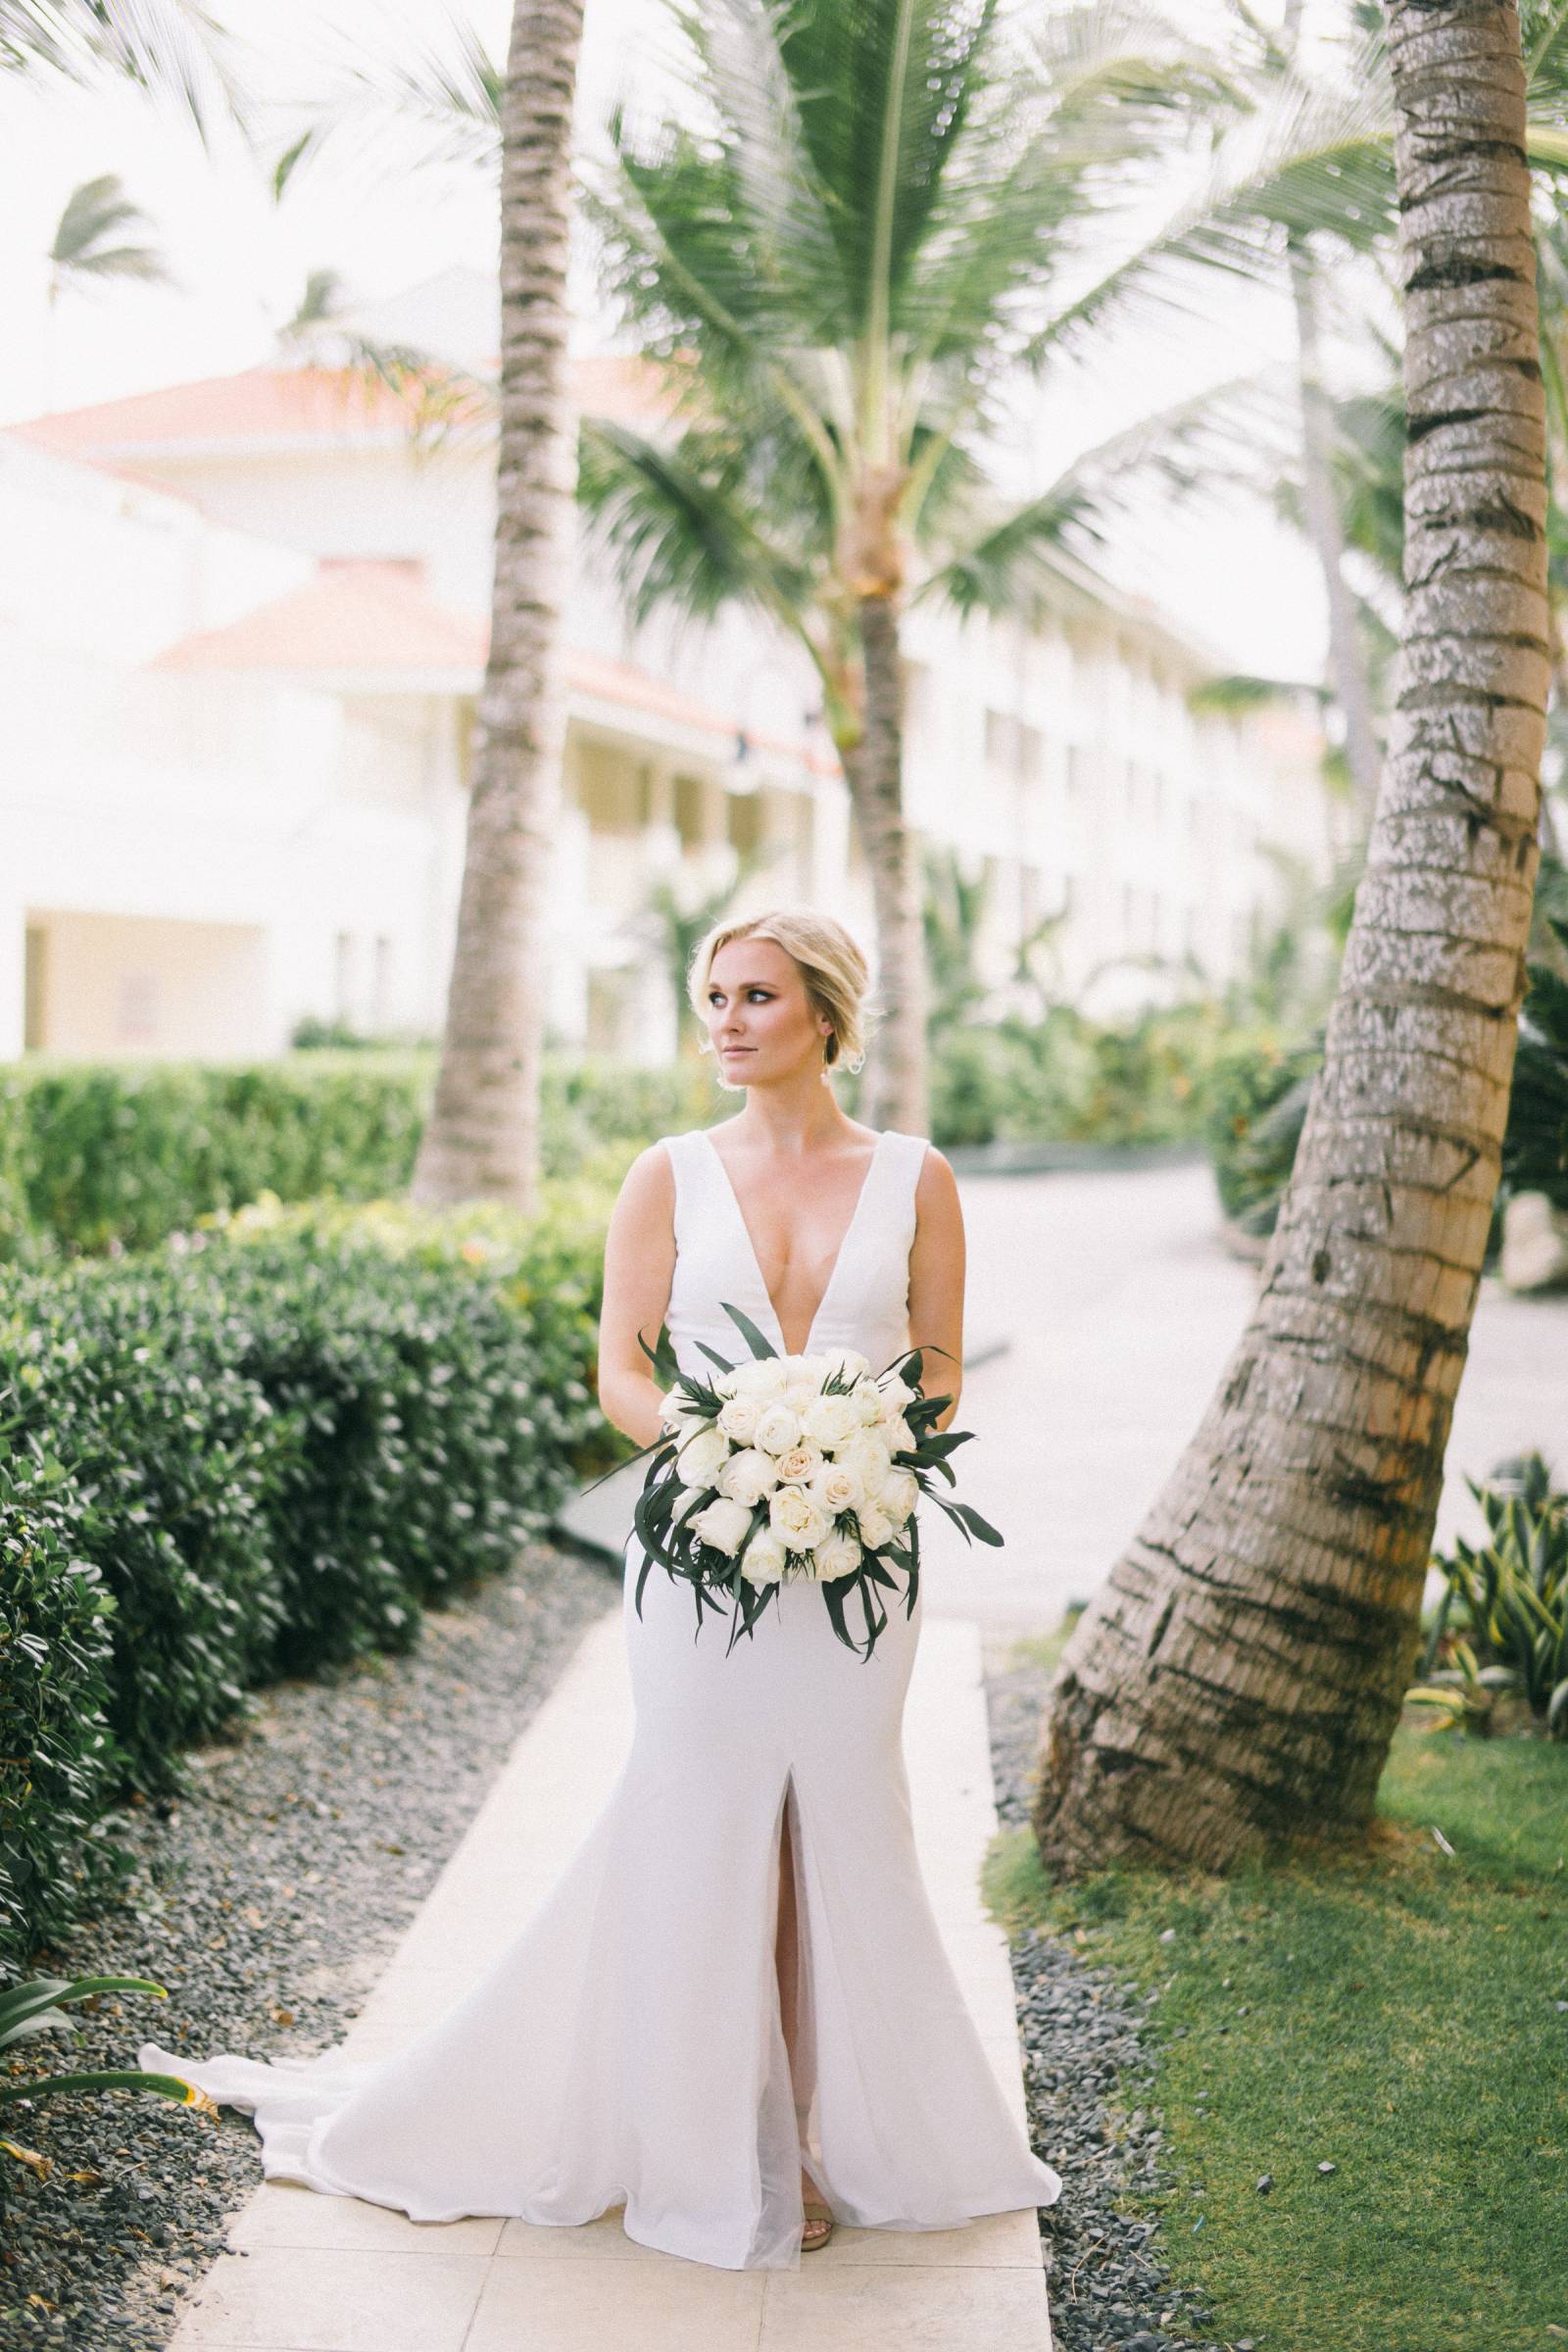 A destination wedding amongst the white sands & palm trees of the ...